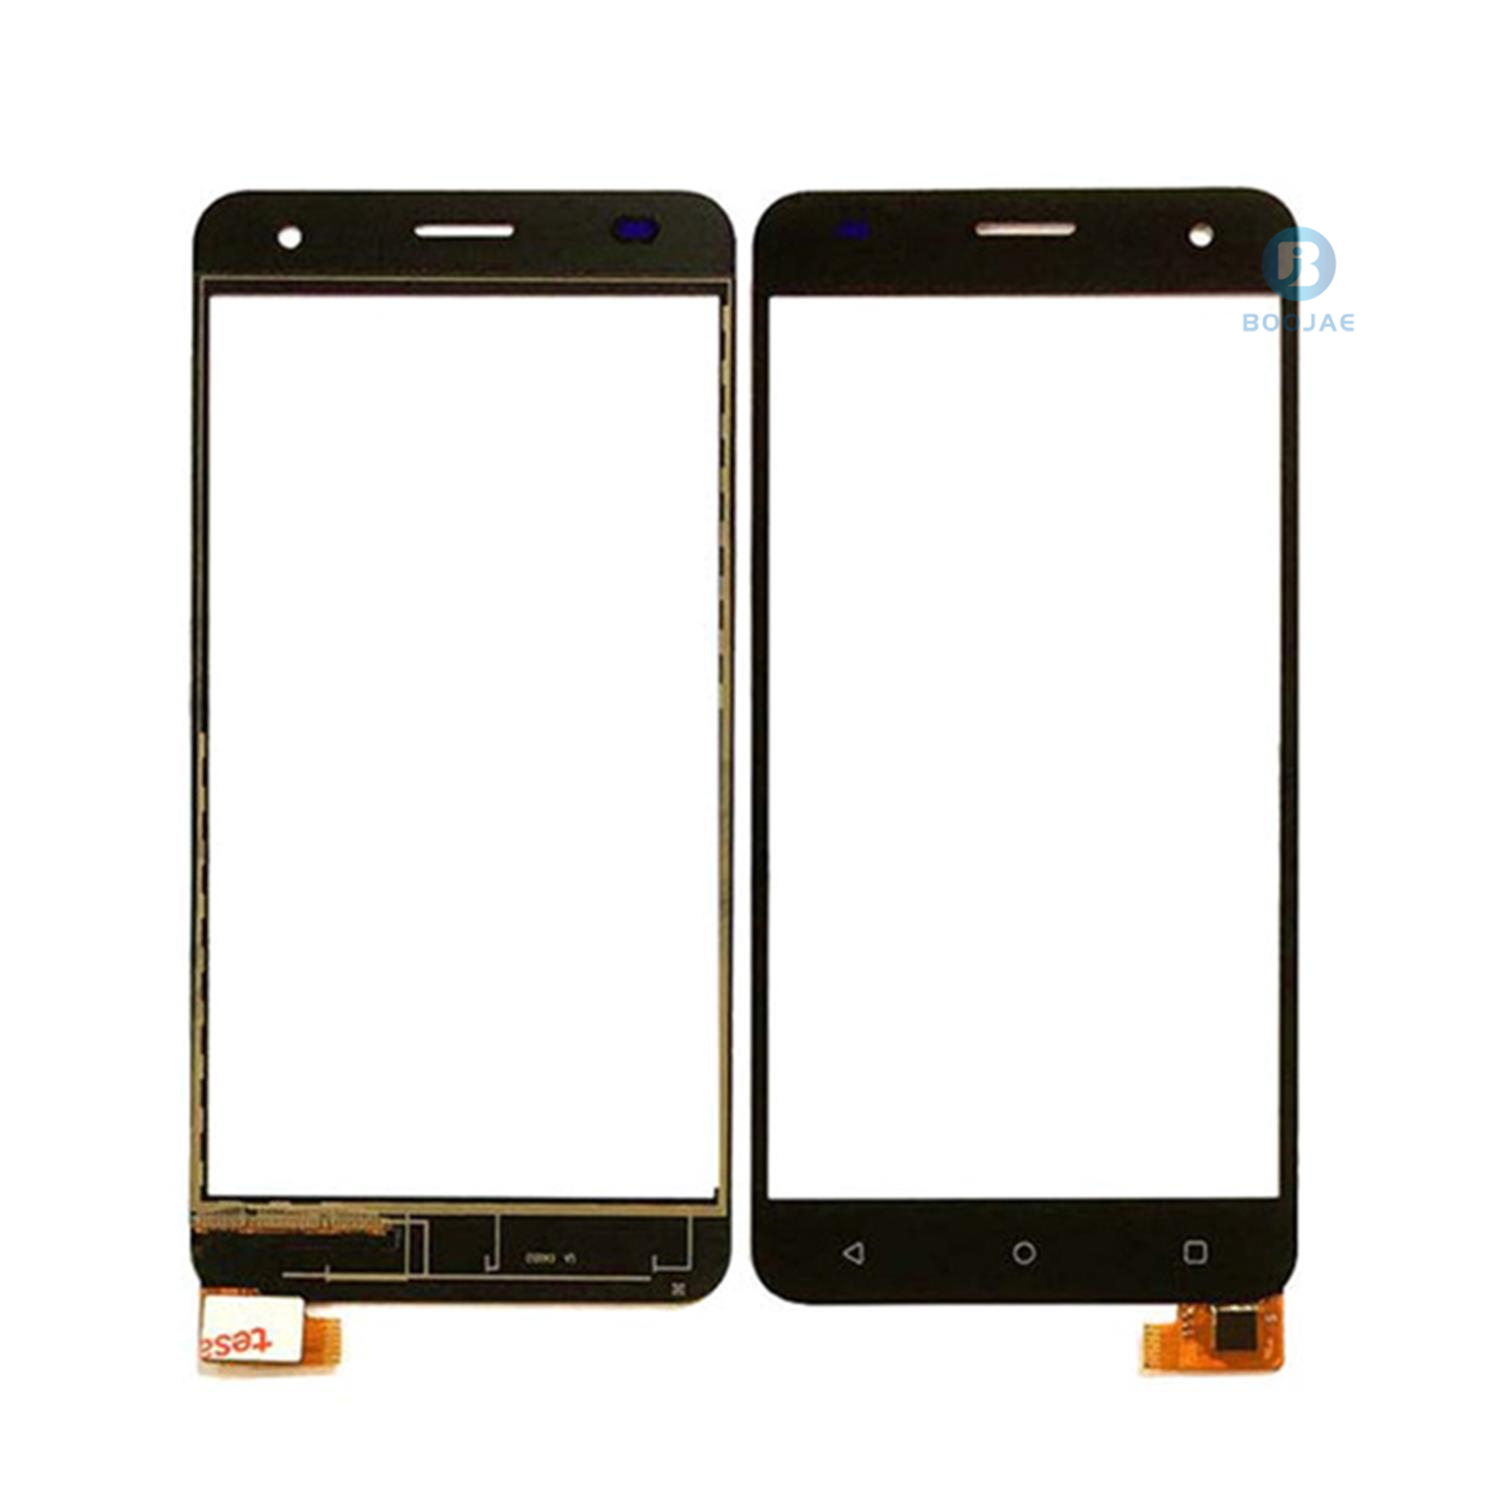 For FLY FS504 touch screen panel digitizer